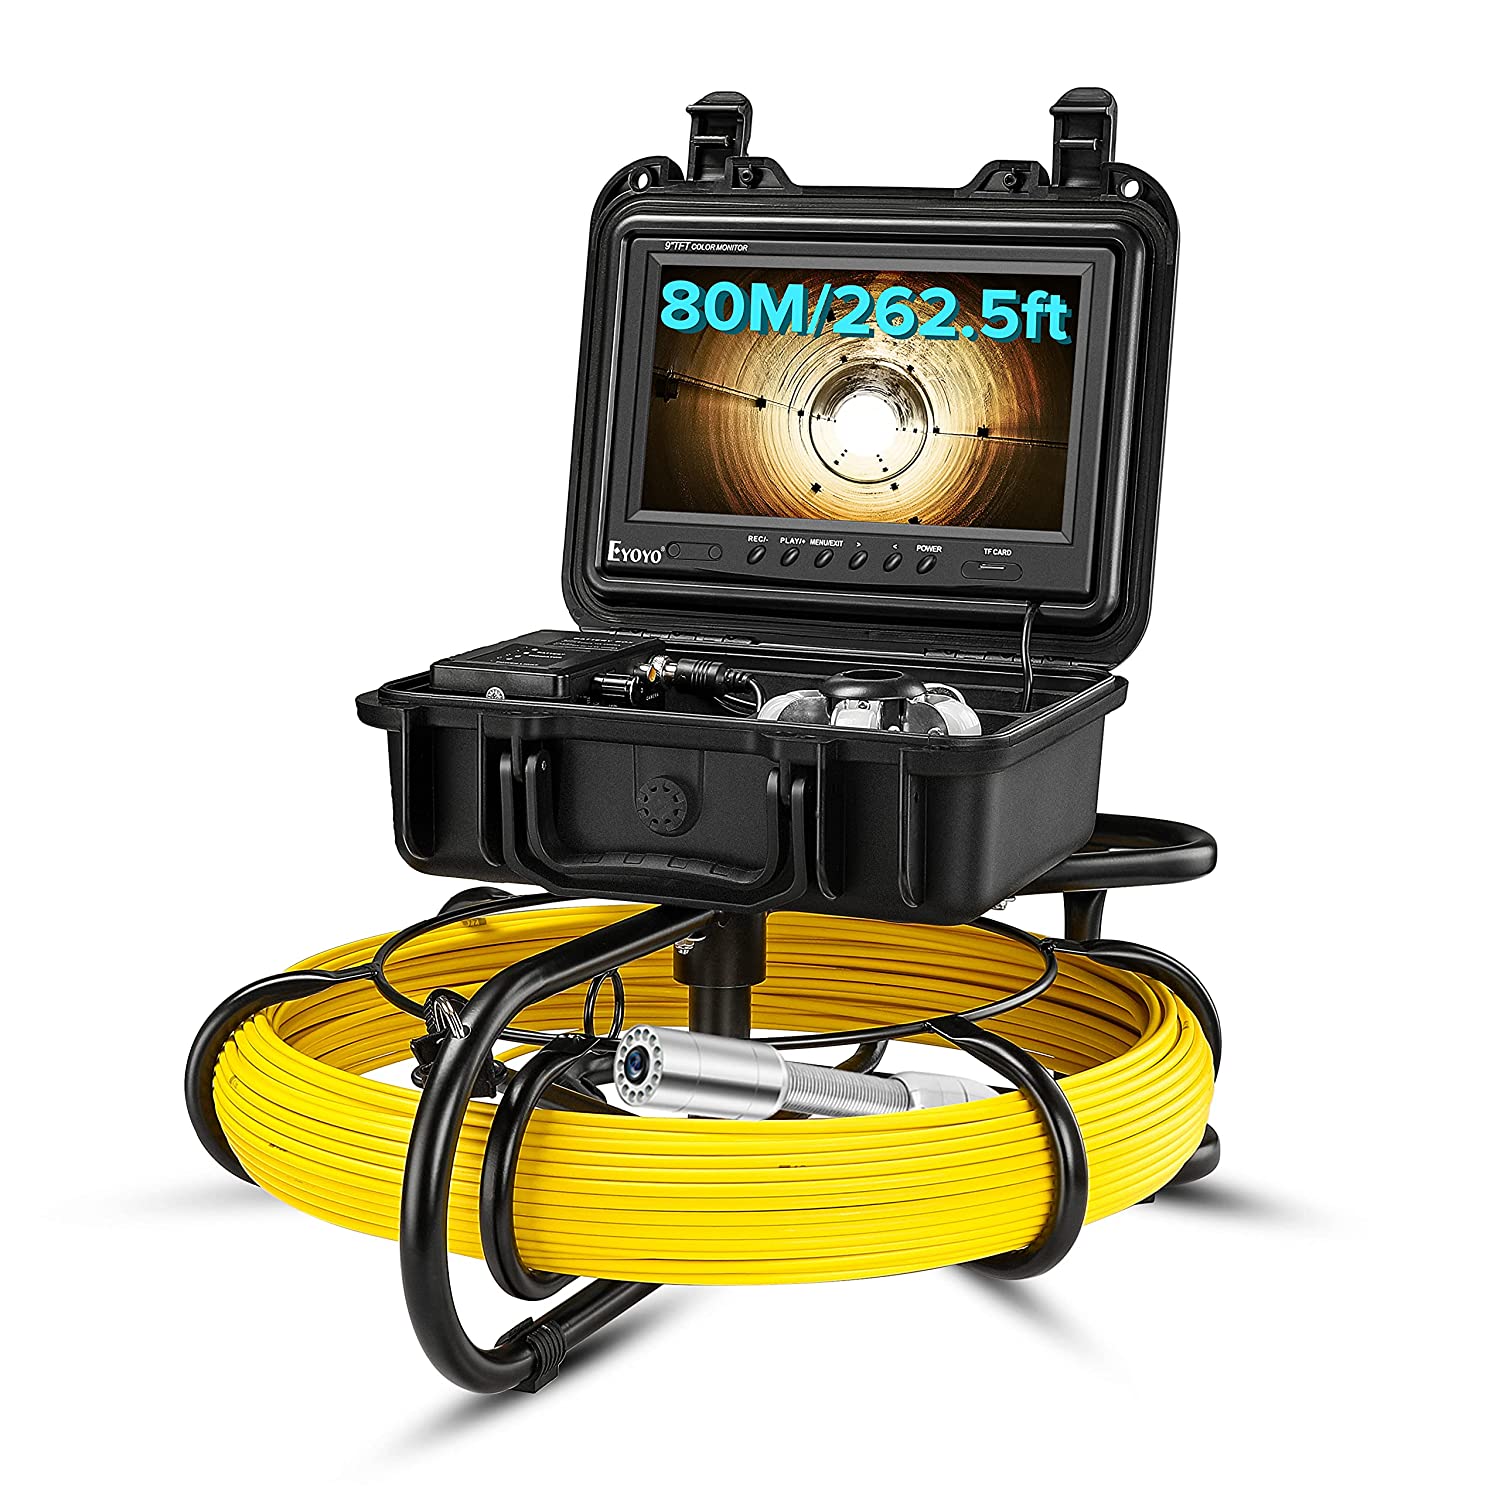 Eyoyo Drain Pipe Inspection Sewer Cameras, 23mm HD 720P Camera with LED, 9  LCD Monitor, 80m/262ft Fiberglass Cable,Rechargeable Li, 8GB TF Card Video  Inspection Plumbing Endoscope Camera,Pipe Inspection Camera